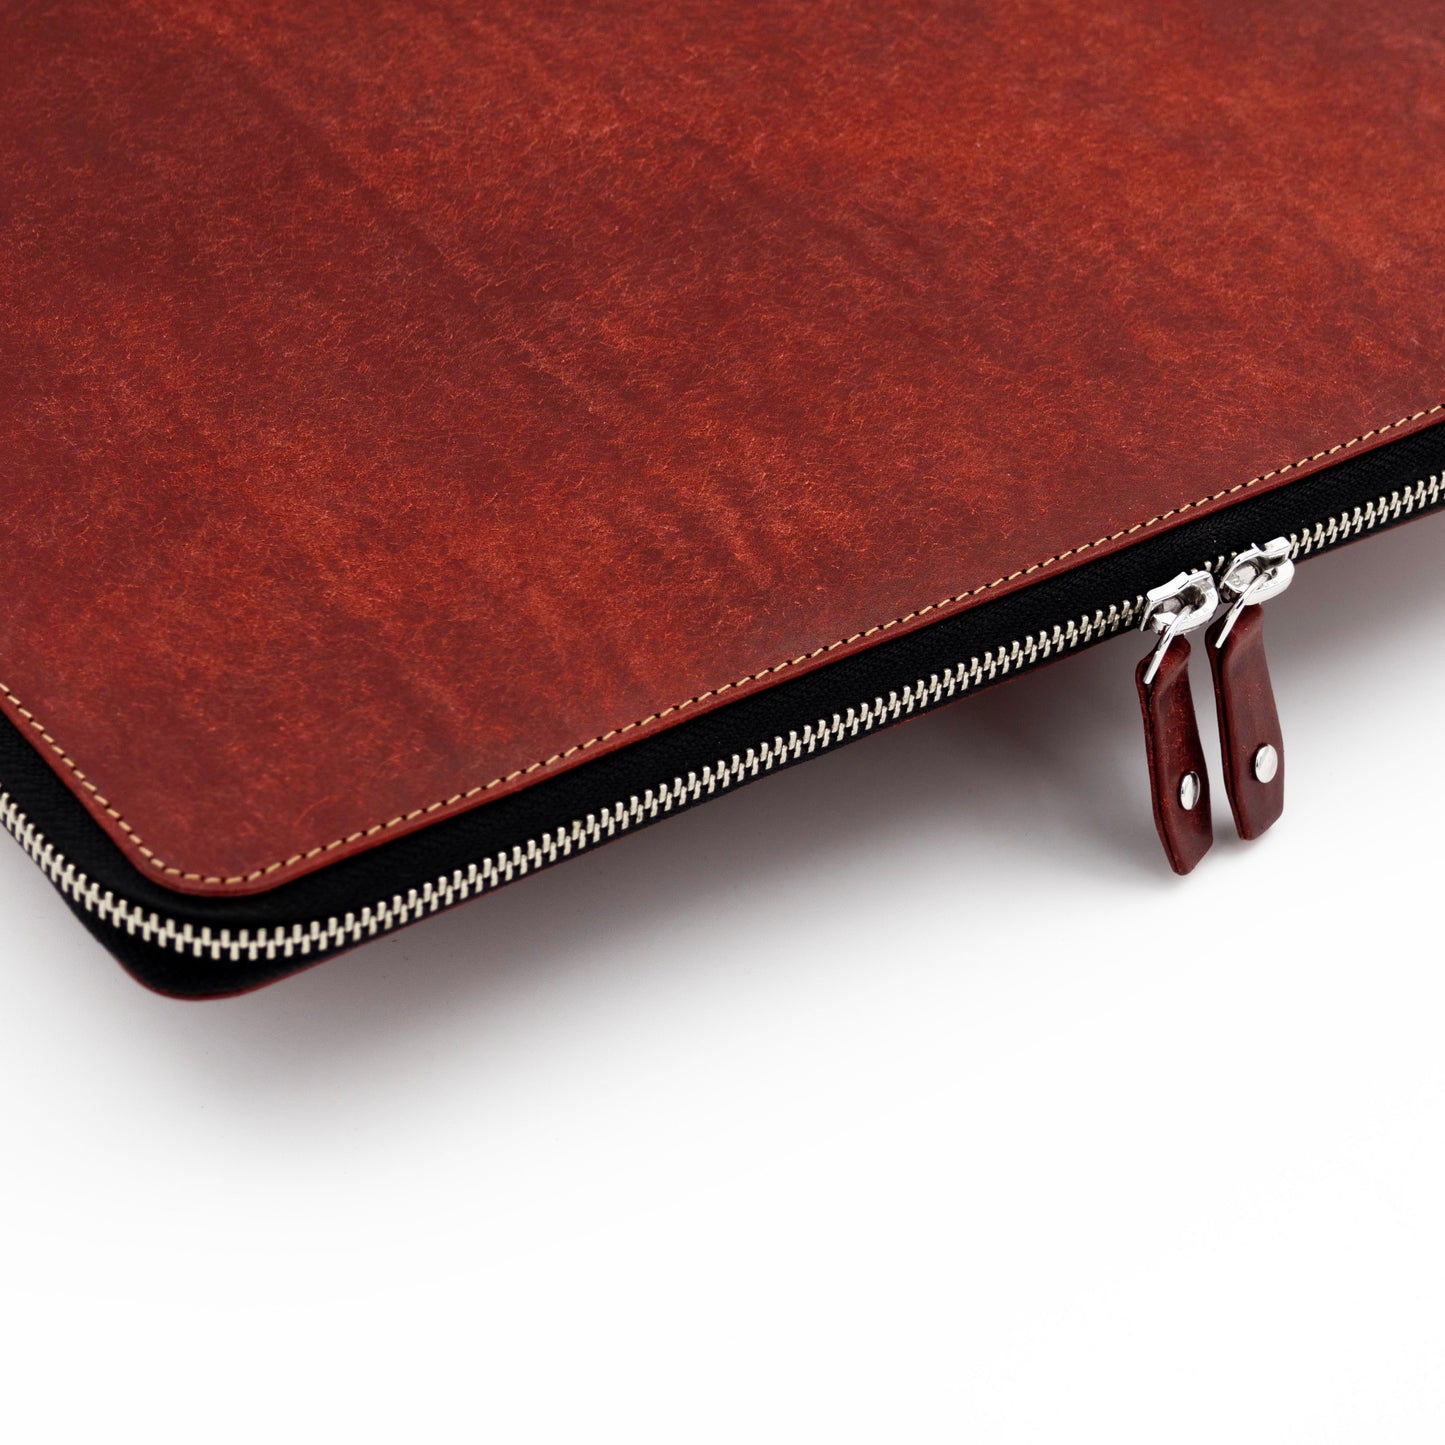 Leather laptop sleeve for Dell XPS 13/ XPS 15 with zippers